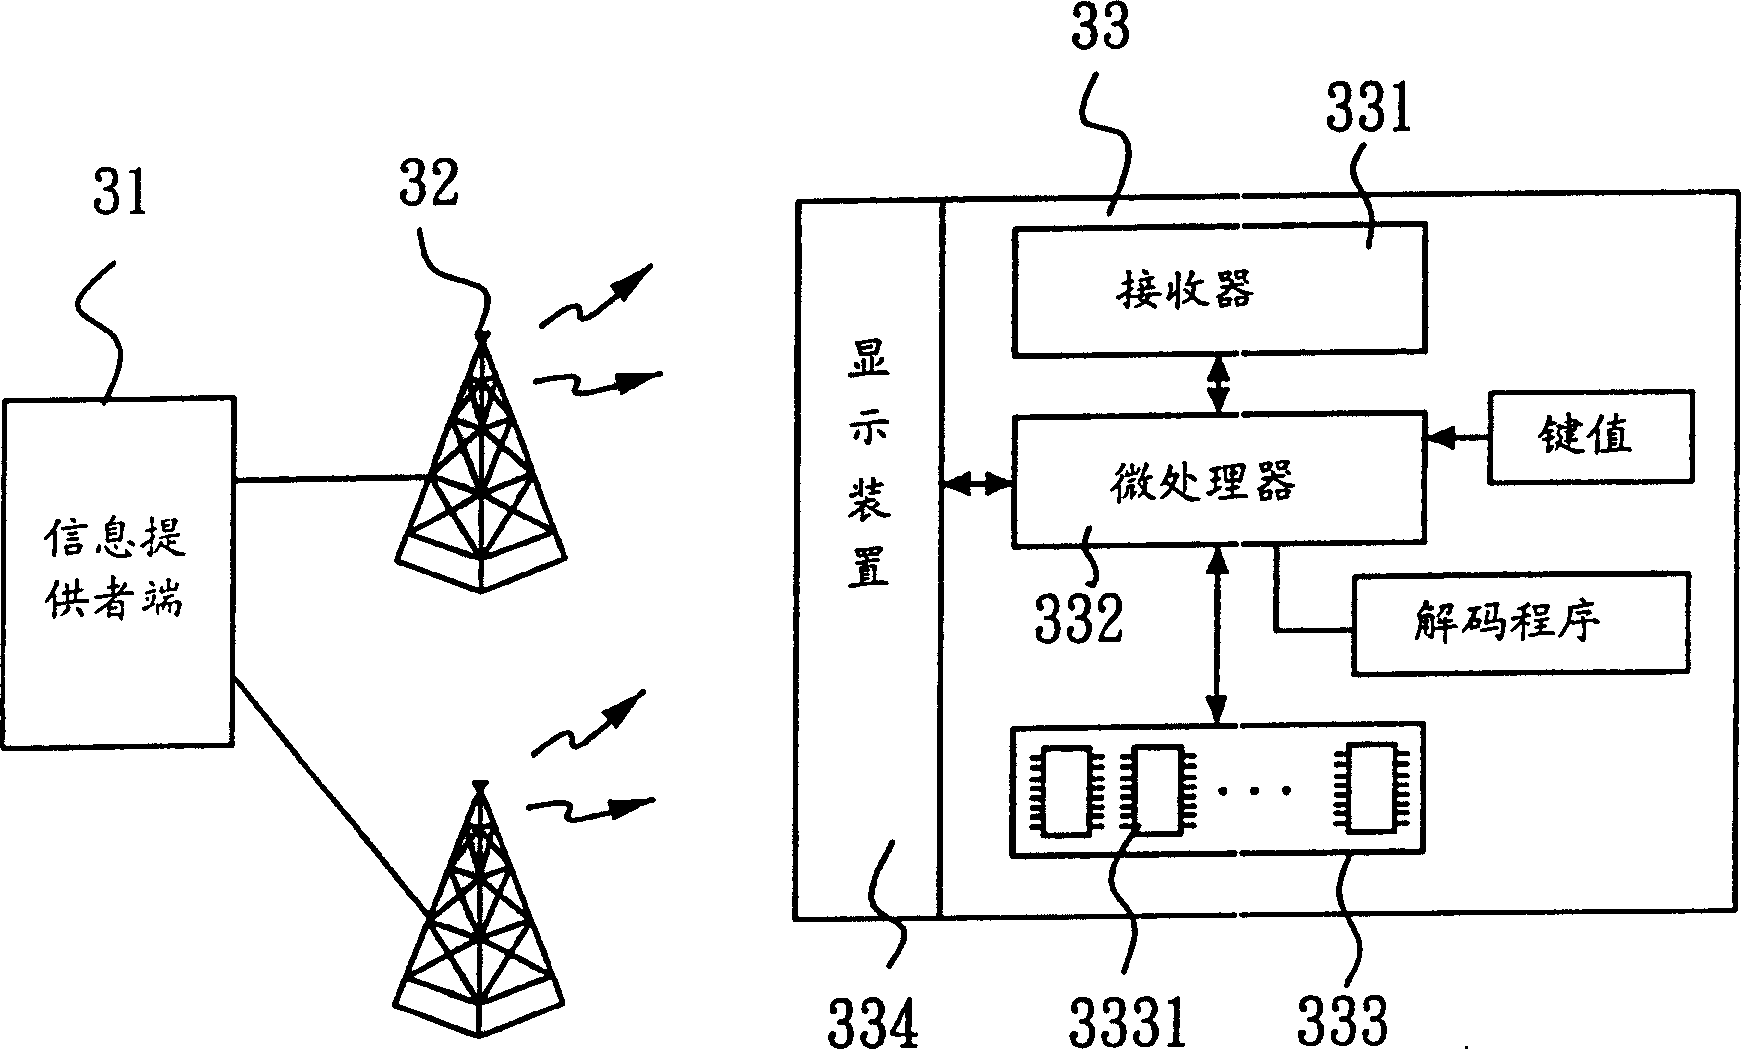 Method for protecting wireless beep pager by encoding handset codes